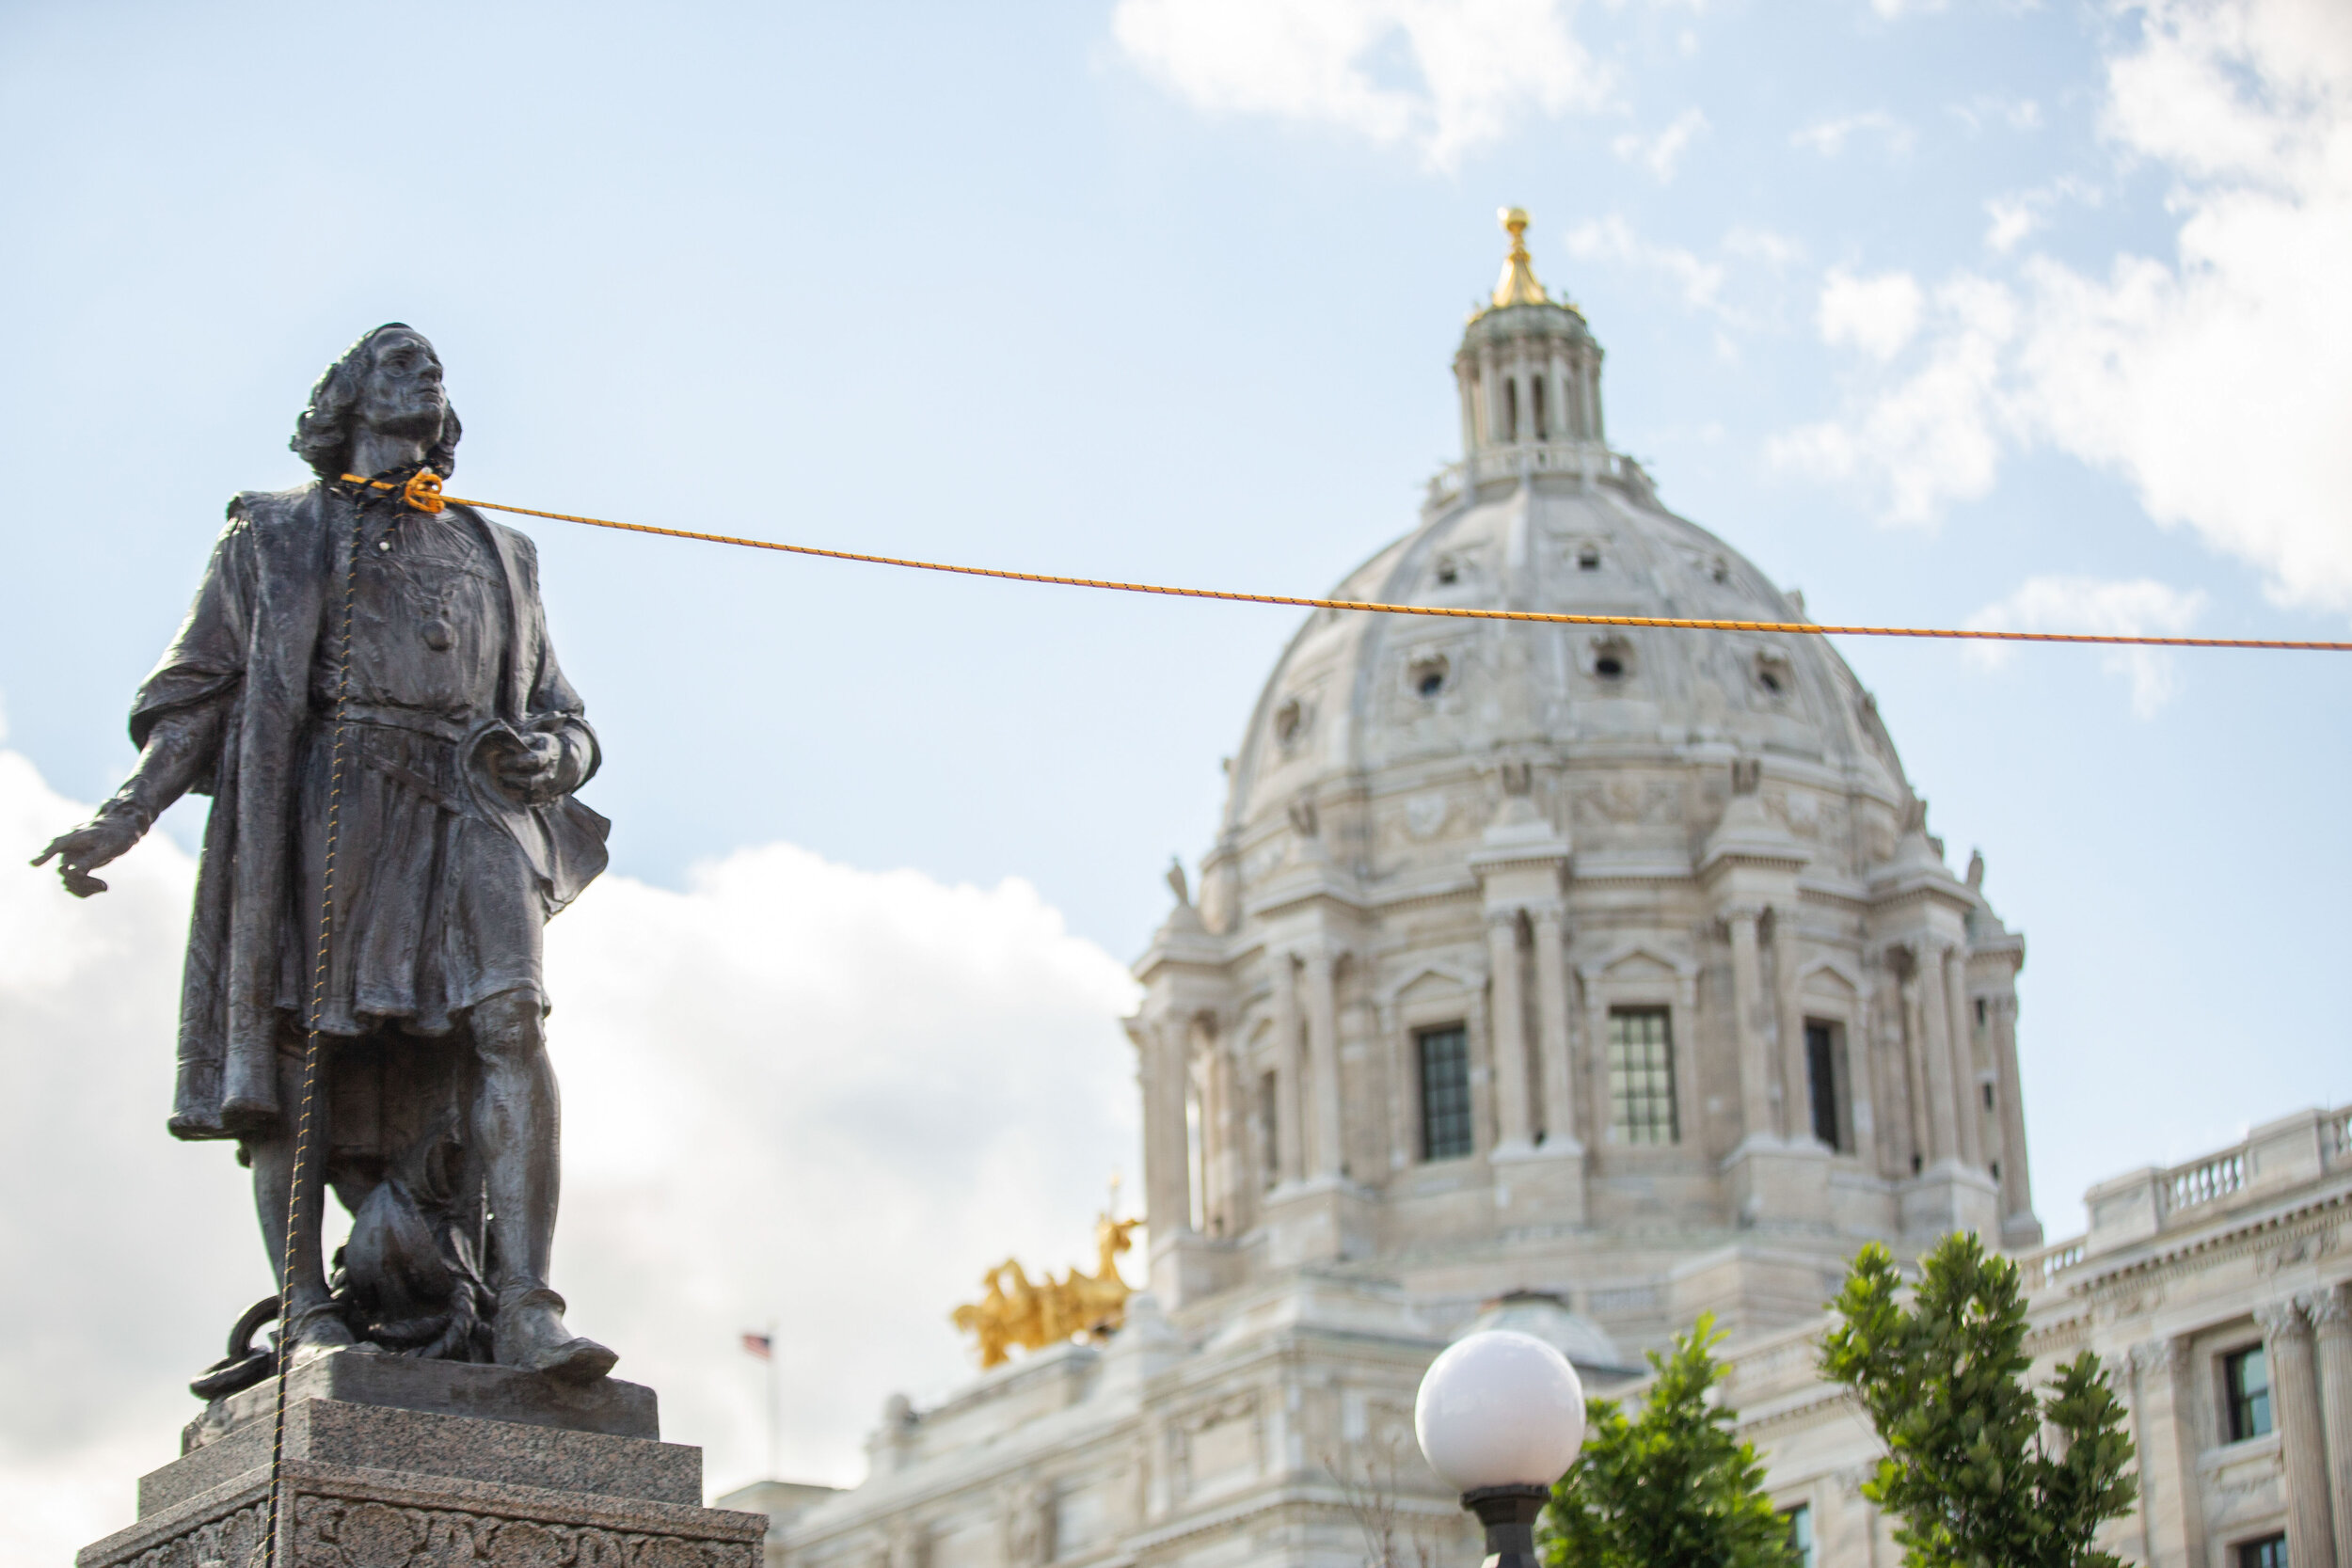  Native American activists sting up rope around the neck of the Christopher Columbus statue on the grounds of the State Capitol in Saint Paul, Minnesota on Jun 10, 2020. 